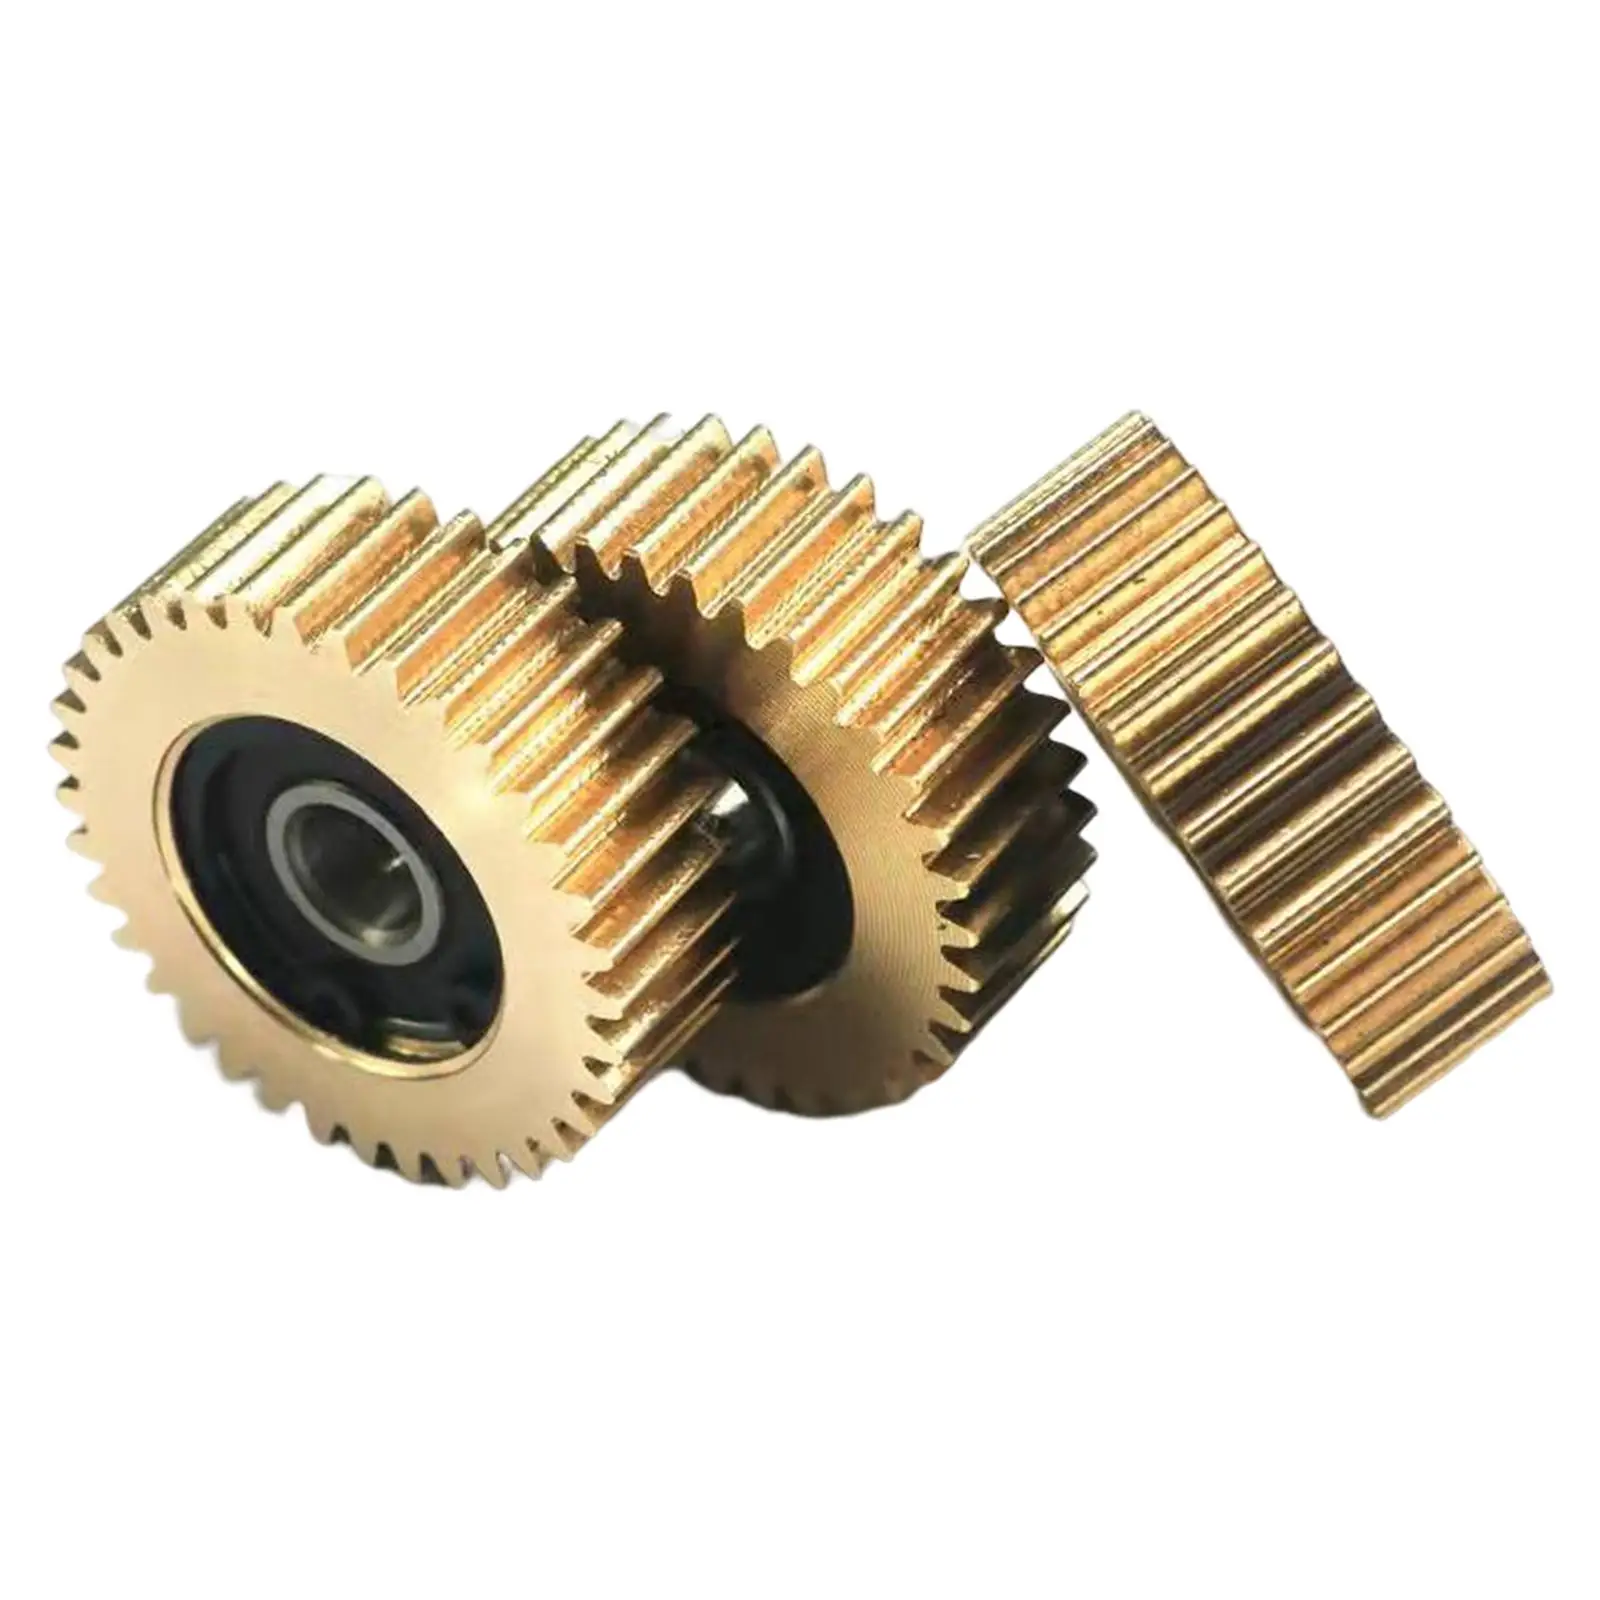 3 Pieces Electric Bikes 36T Planetary Gears Diameter for Motor